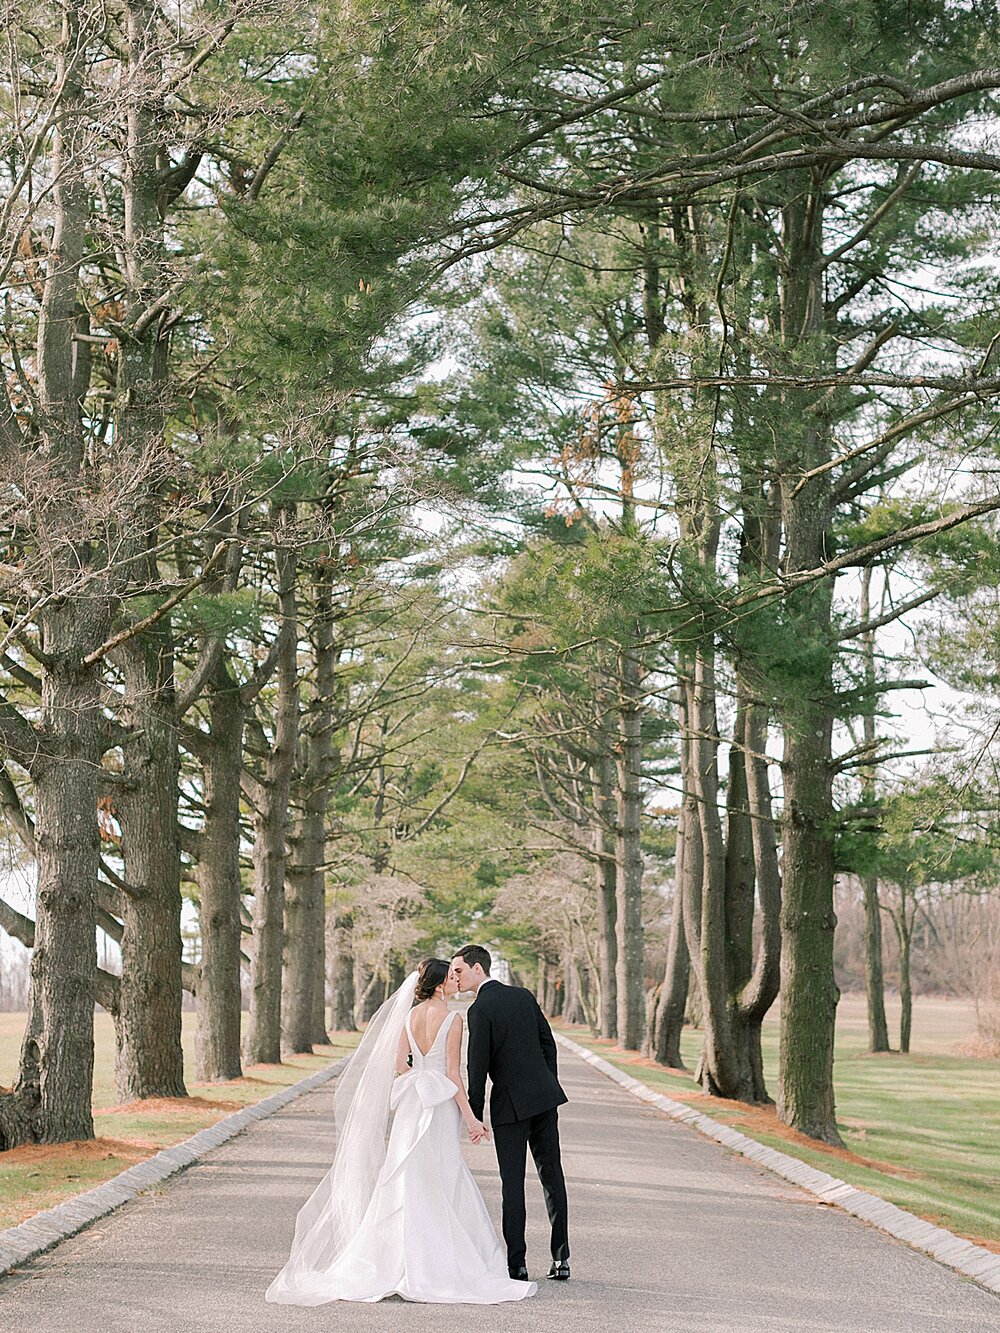 New Jersey wedding portraits at Ashford Estate | Tri-State area wedding venues photographed by Asher Gardner Photography